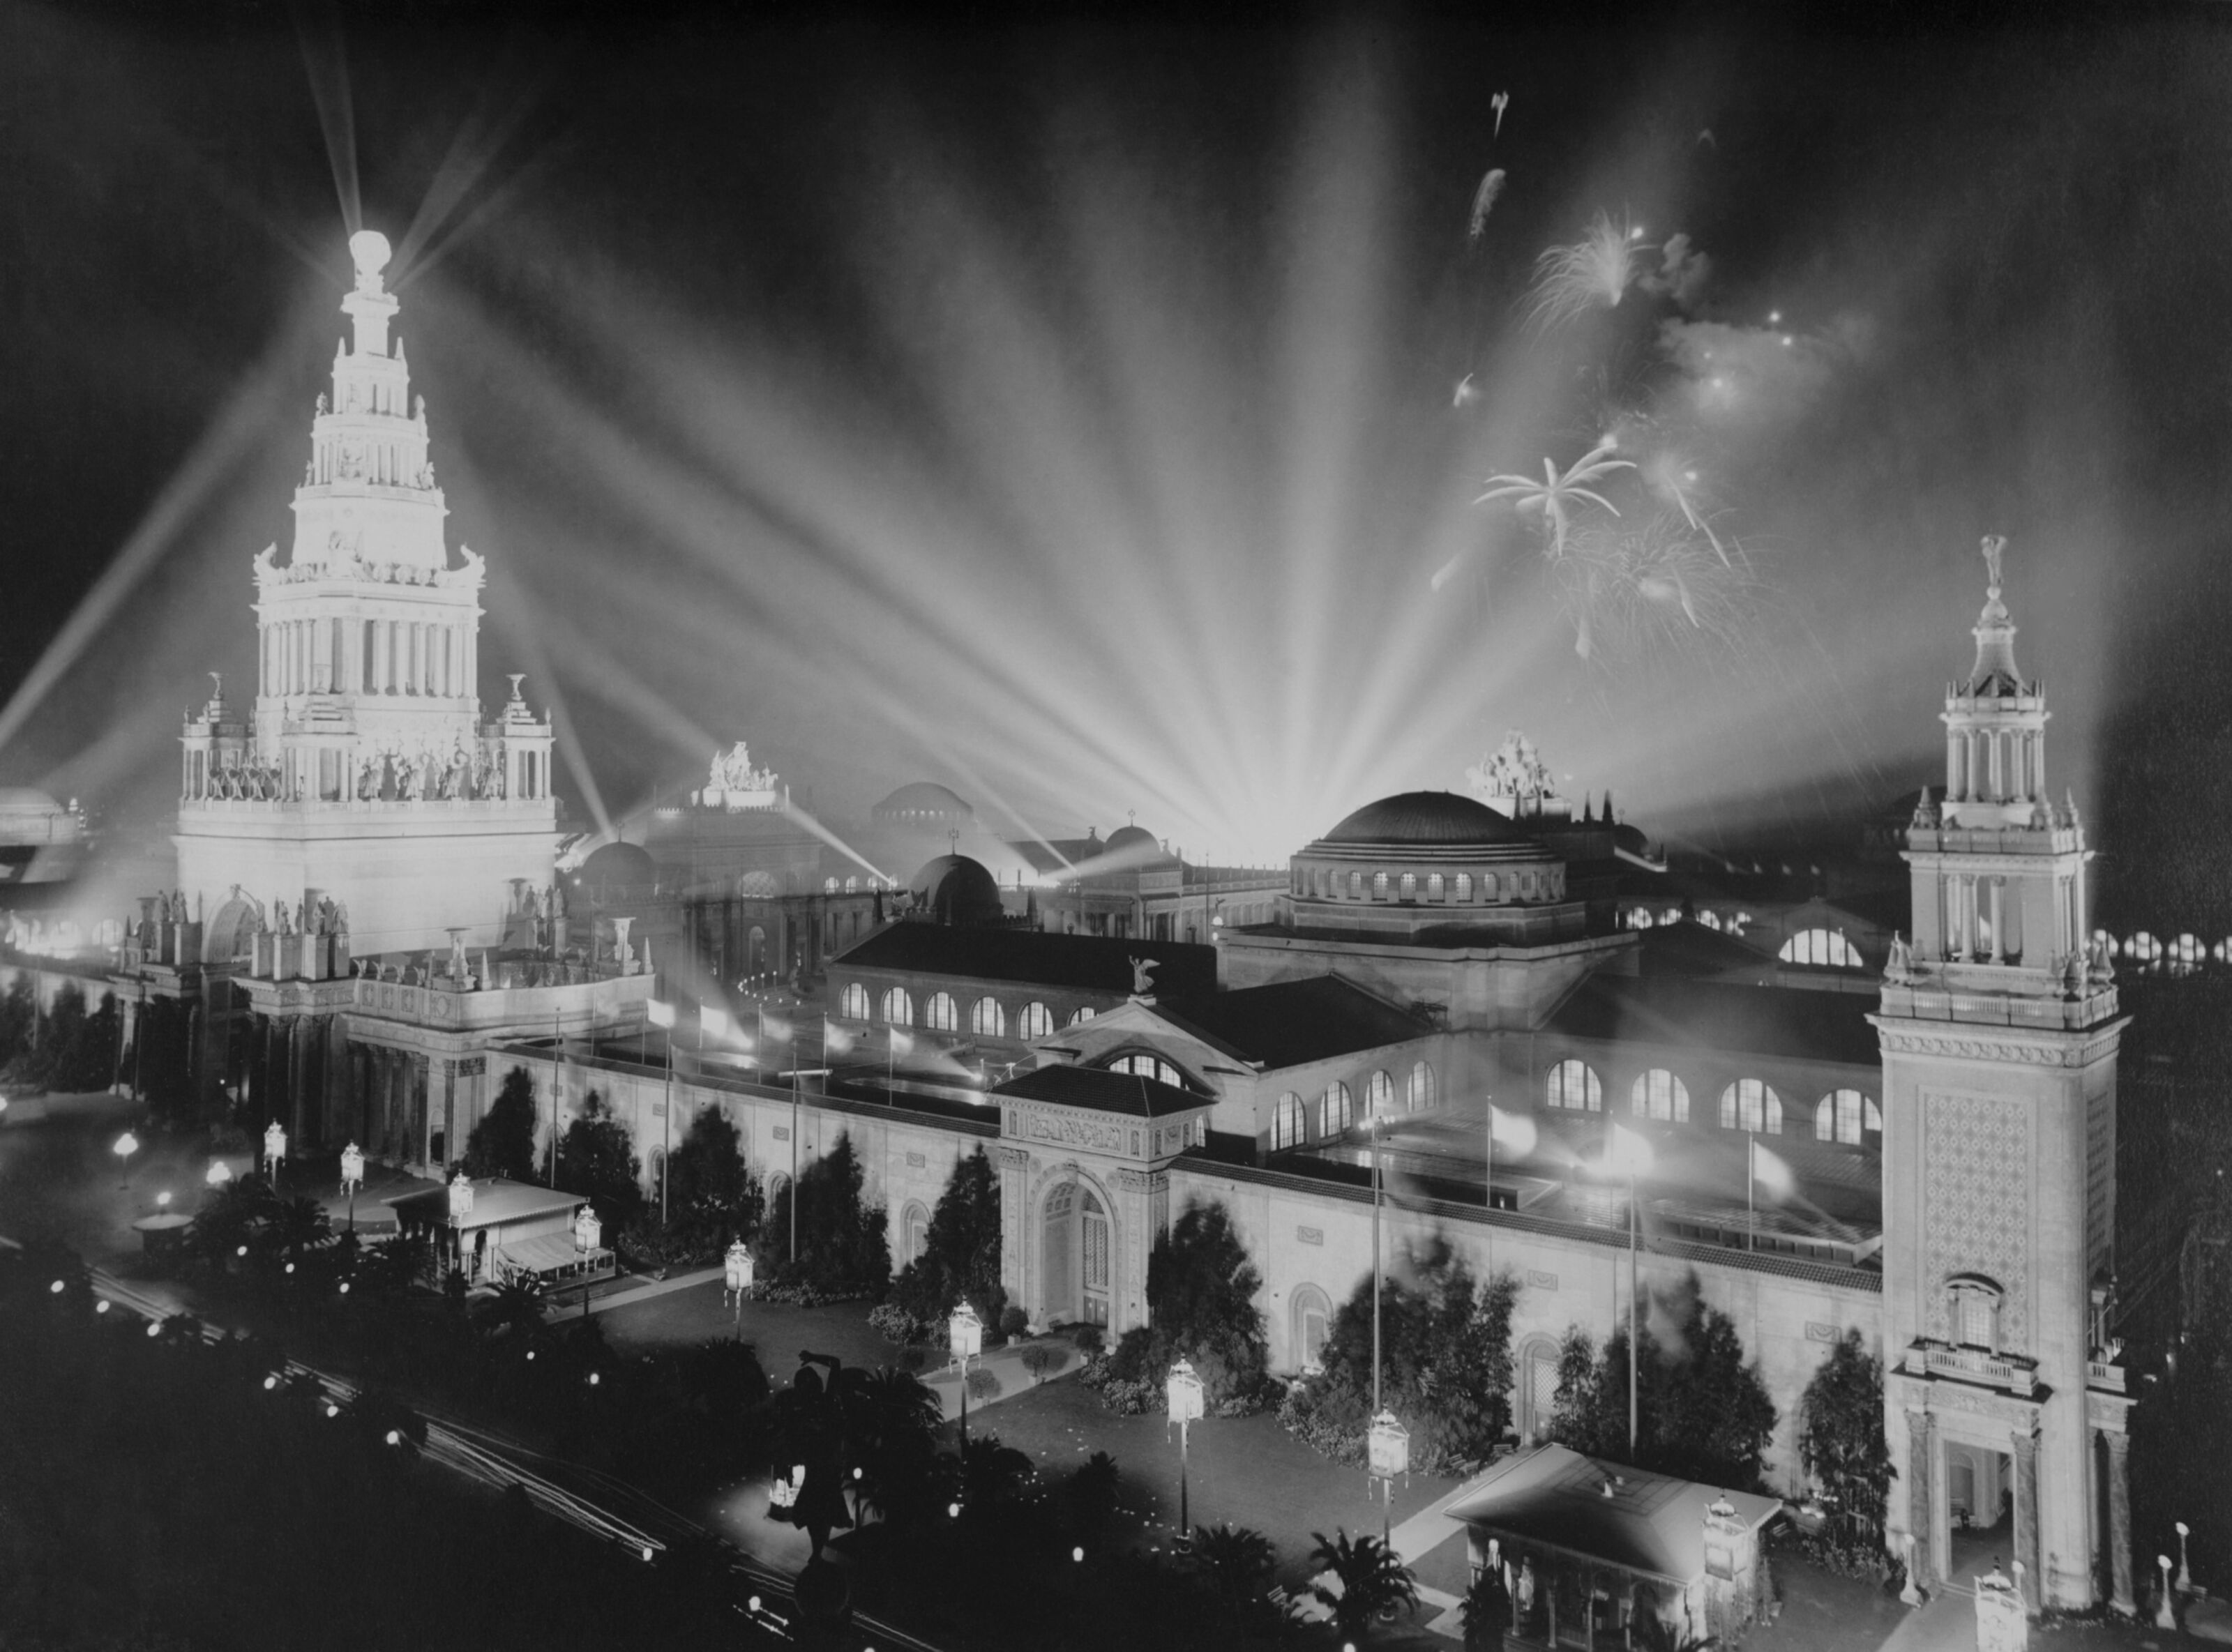 Believers in the “Tartaria” conspiracy theory are convinced that the elaborate temporary fairgrounds built for events like the Panama-Pacific International Exposition in San Francisco in 1915 were really the ancient capital cities of a fictional empire.

 